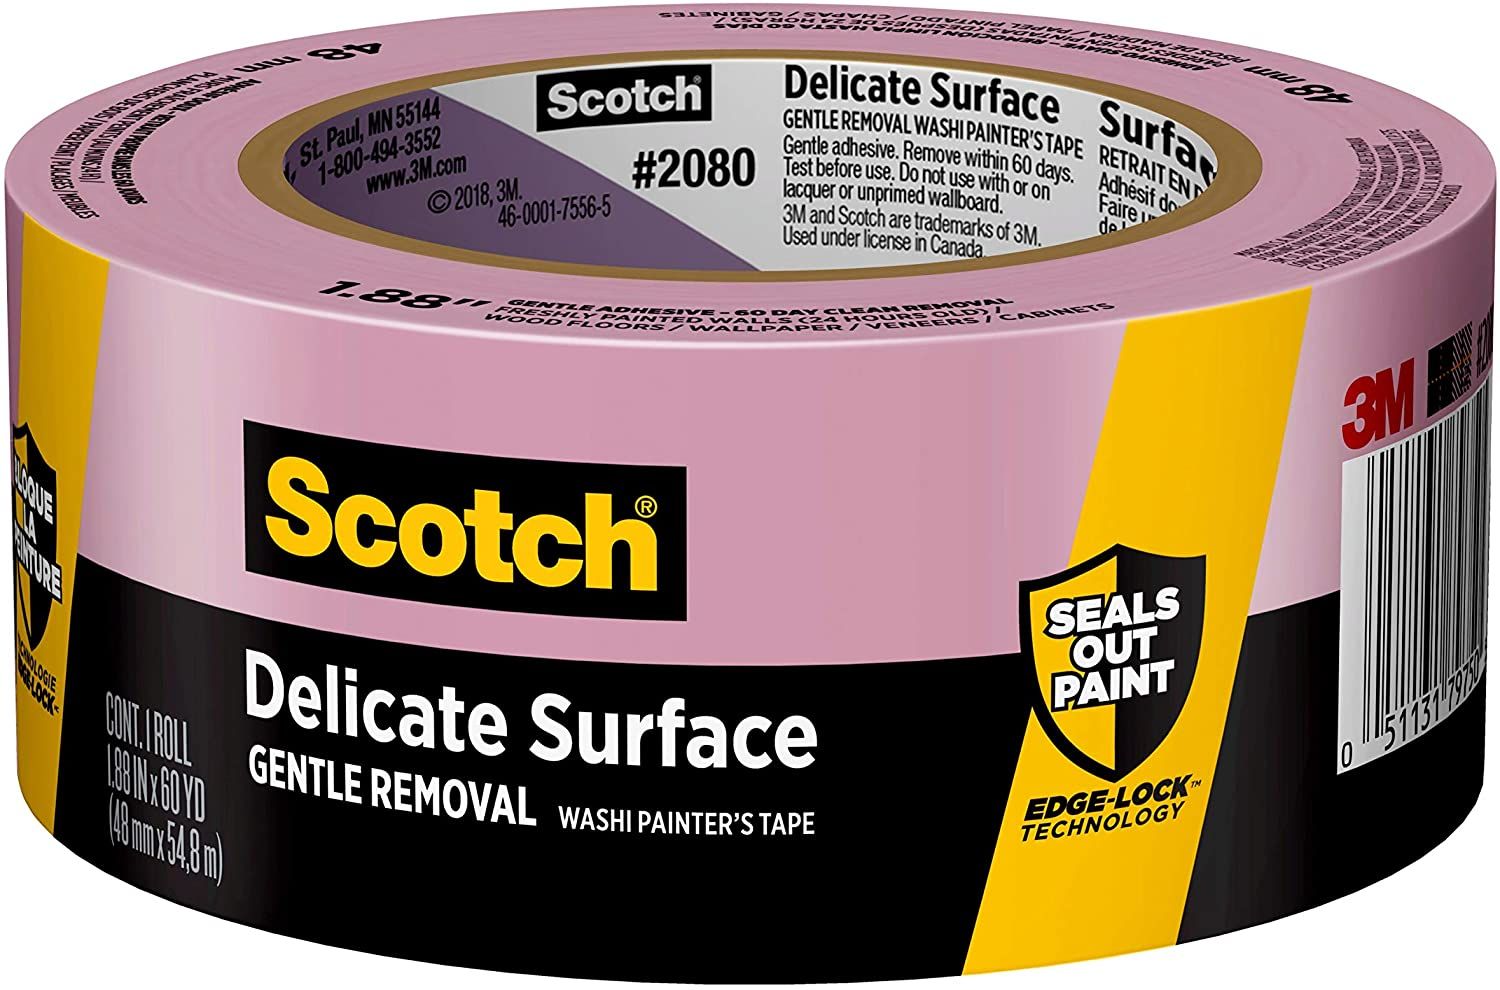 Scotch Delicate Surface Washi Painter’s Tape